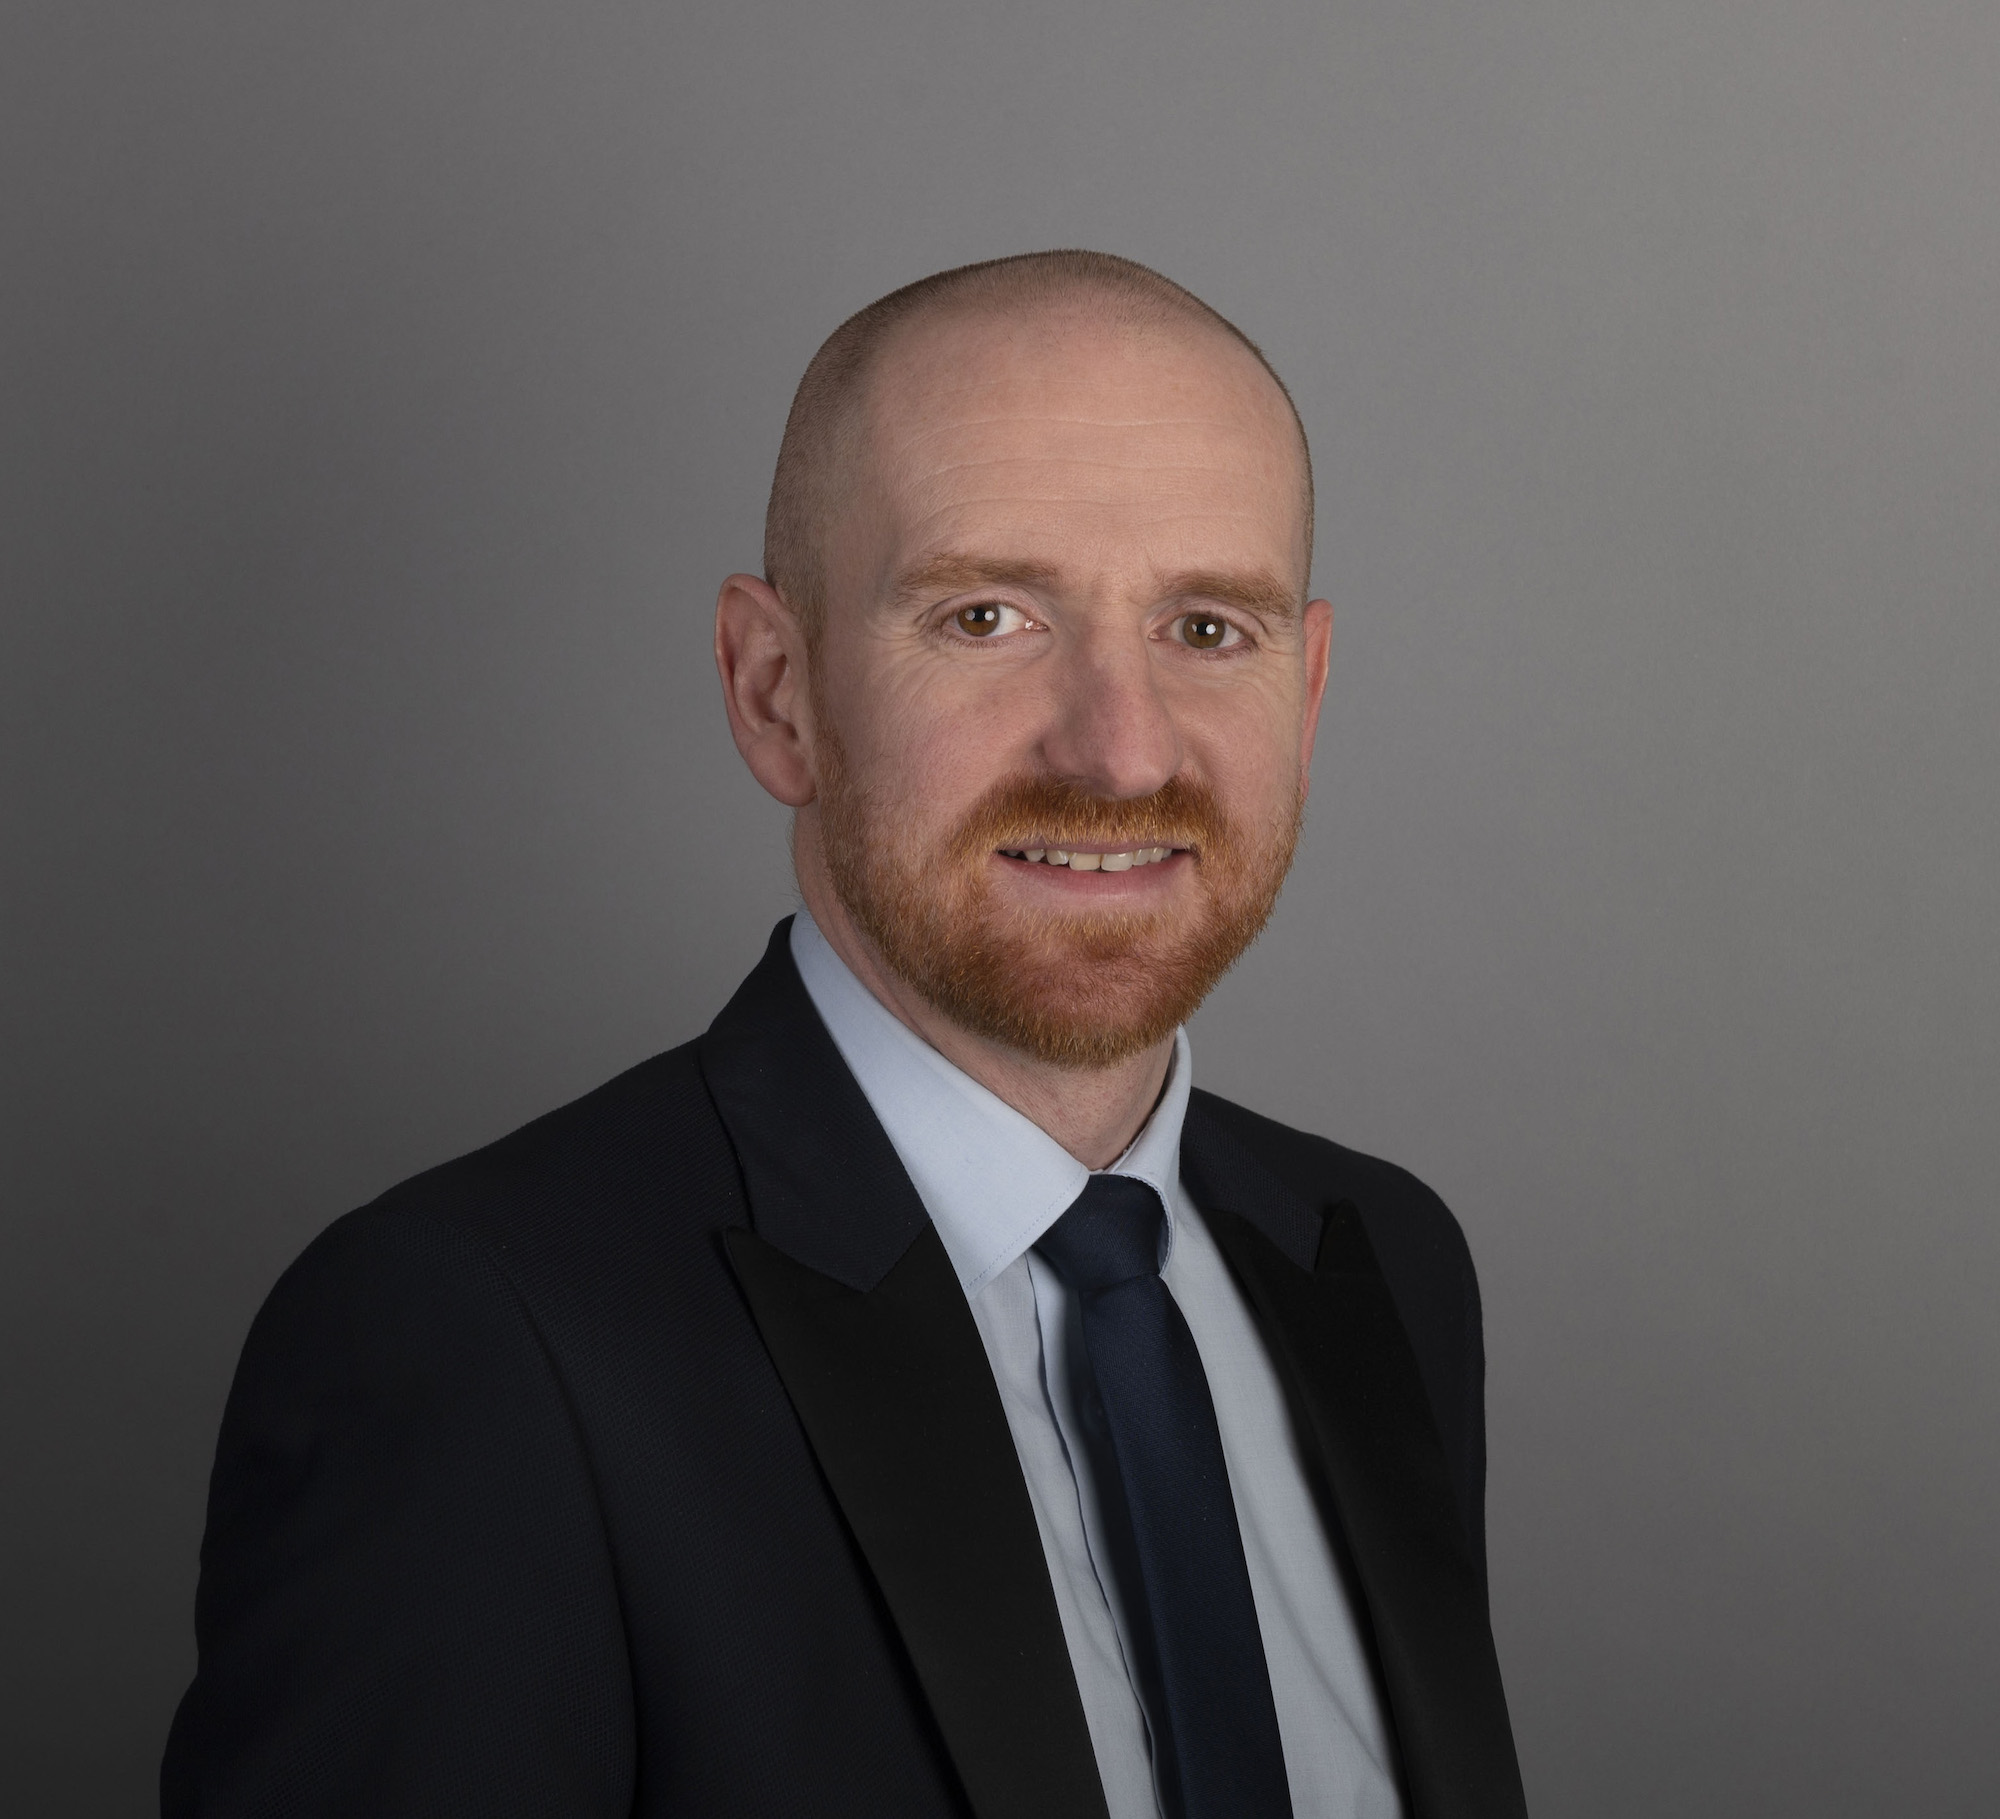 Decom Mission appoints oil and gas specialist Calum Crighton to board